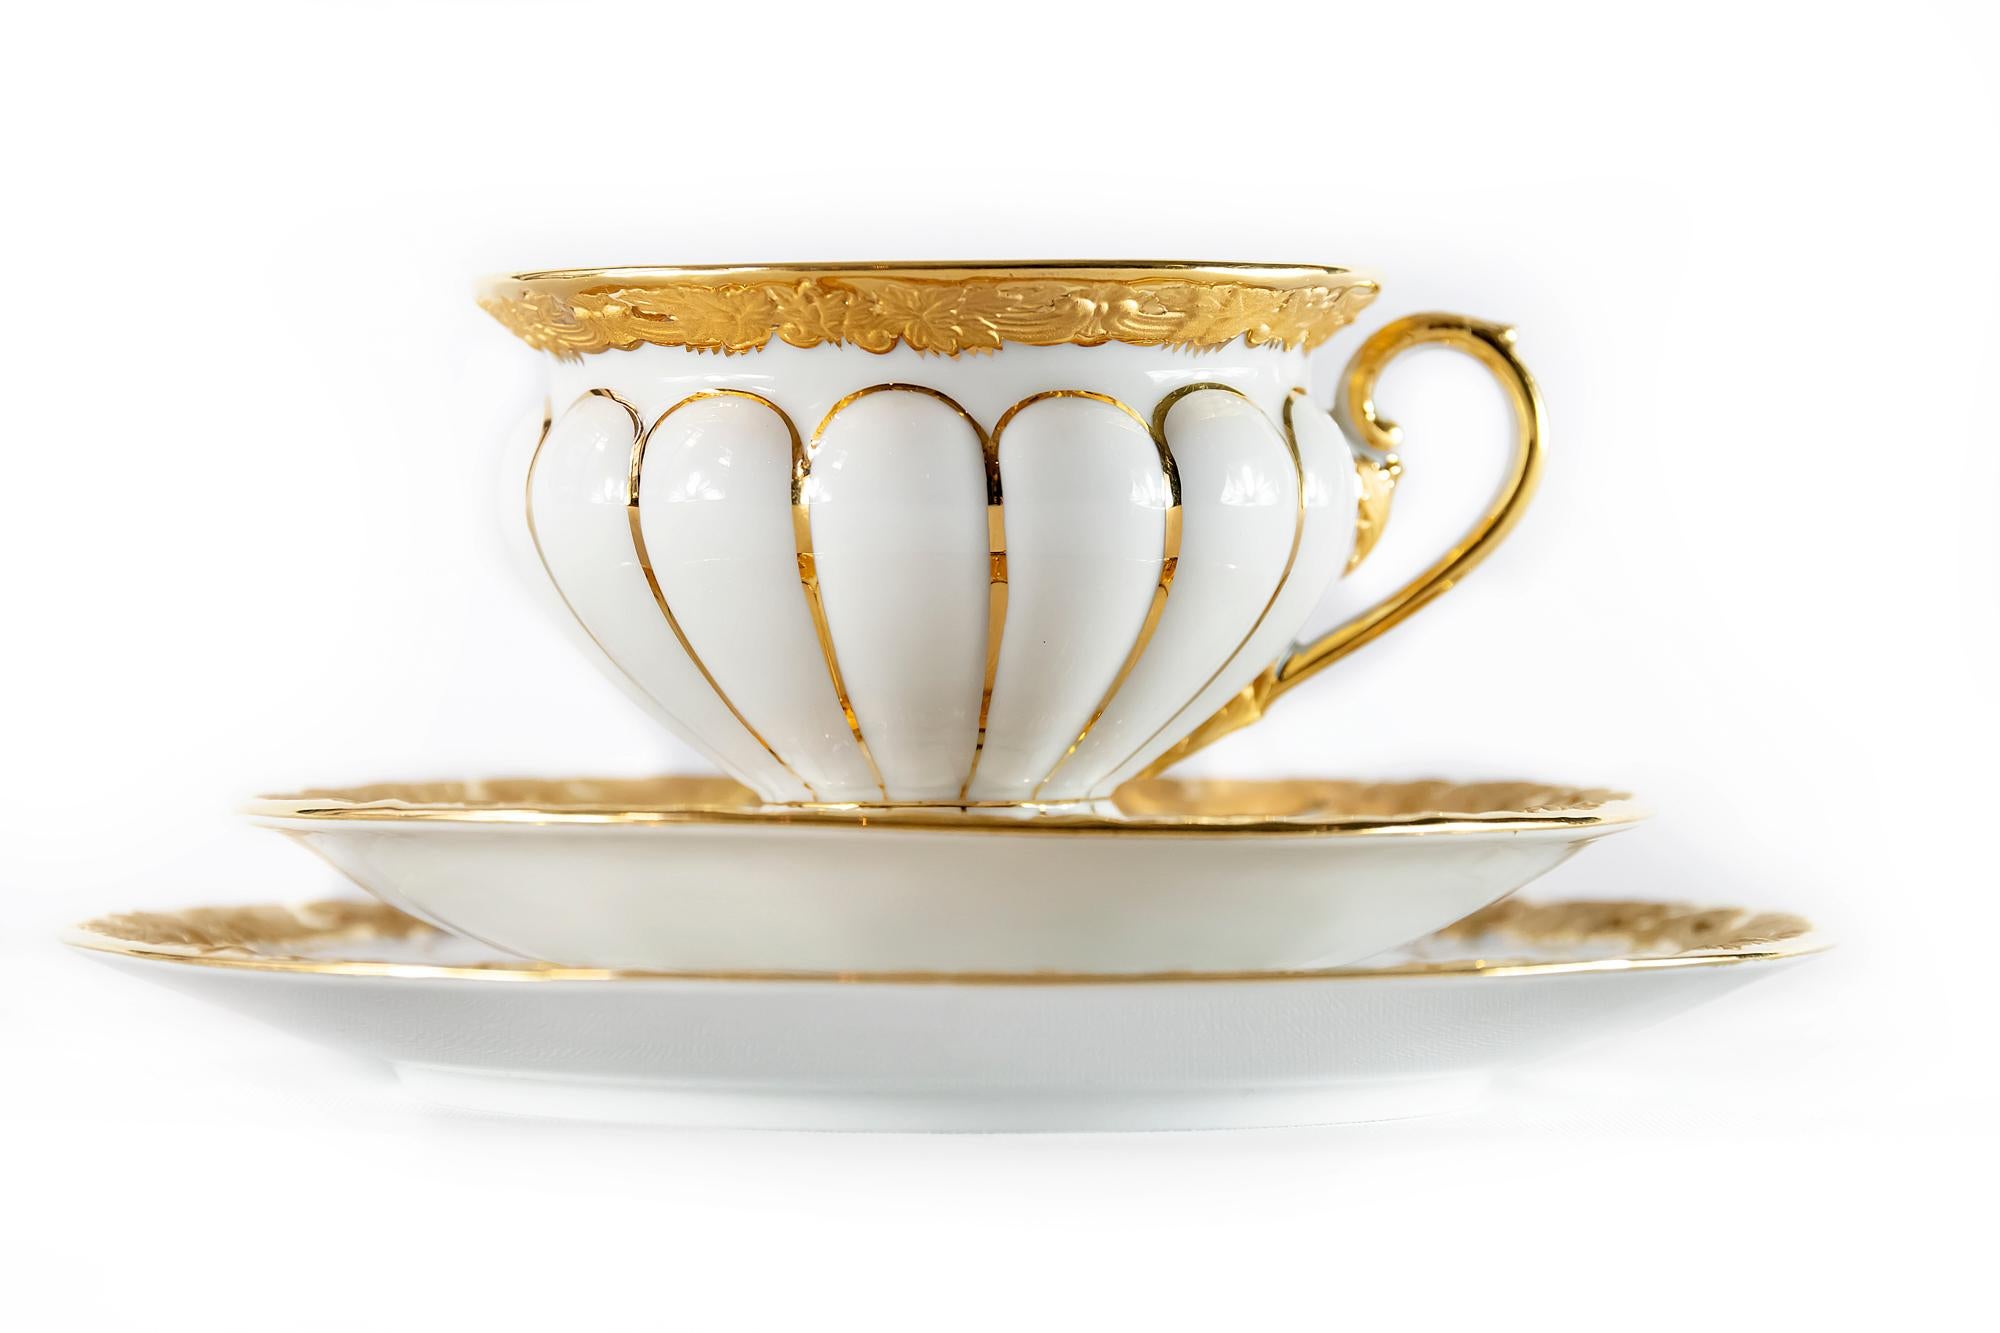 Meissen porcelain tea cup with saucer and dessert plate all richly decorated with gold.
Measures:
Cup: 7.2 (H) x 10 cm
Saucer: 15.5 cm
Dessert plate: 19.5 cm.
 